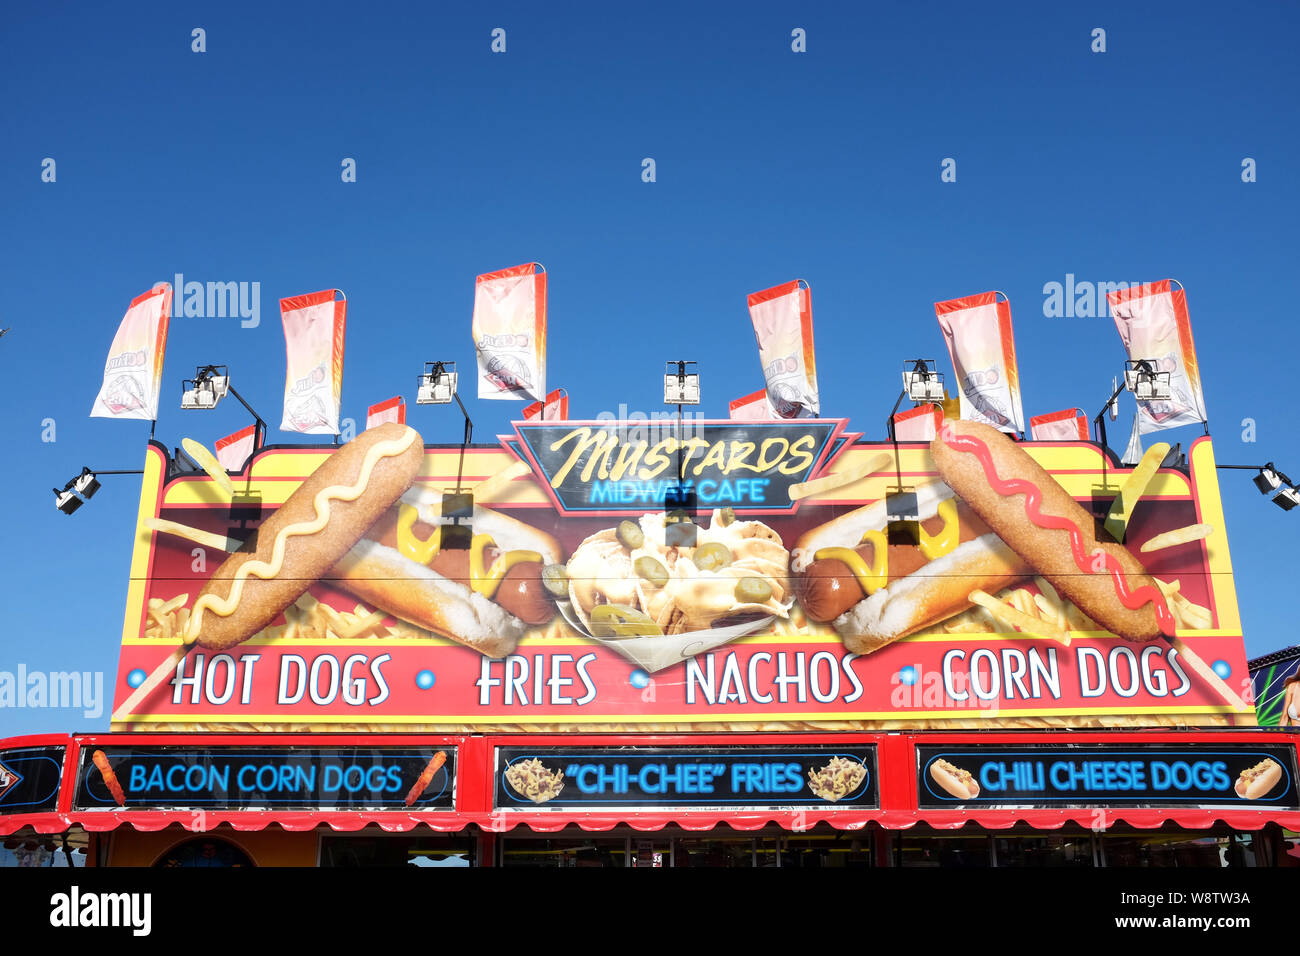 COSTA MESA, CALIFORNIA - AUG 8, 2019: Mustards Midway Cafe at the Orange County Fair. Stock Photo